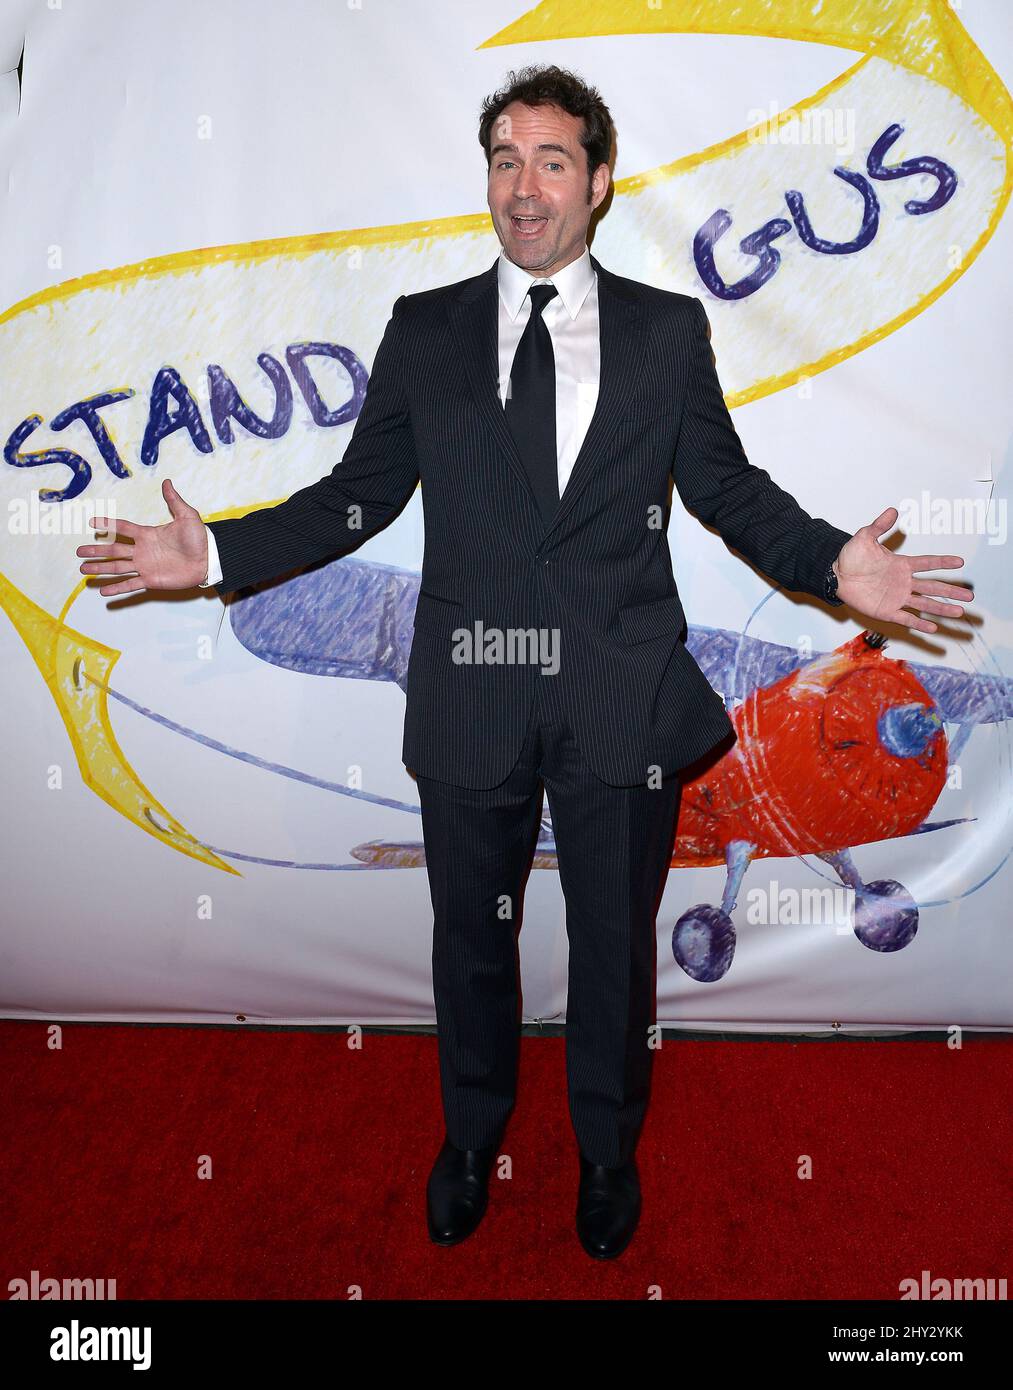 Jason Patric arriva al beneficio 'Stand Up for Gus' a Bootsy Bellows mercoledì 13 novembre 2013 a West Hollywood. Foto Stock